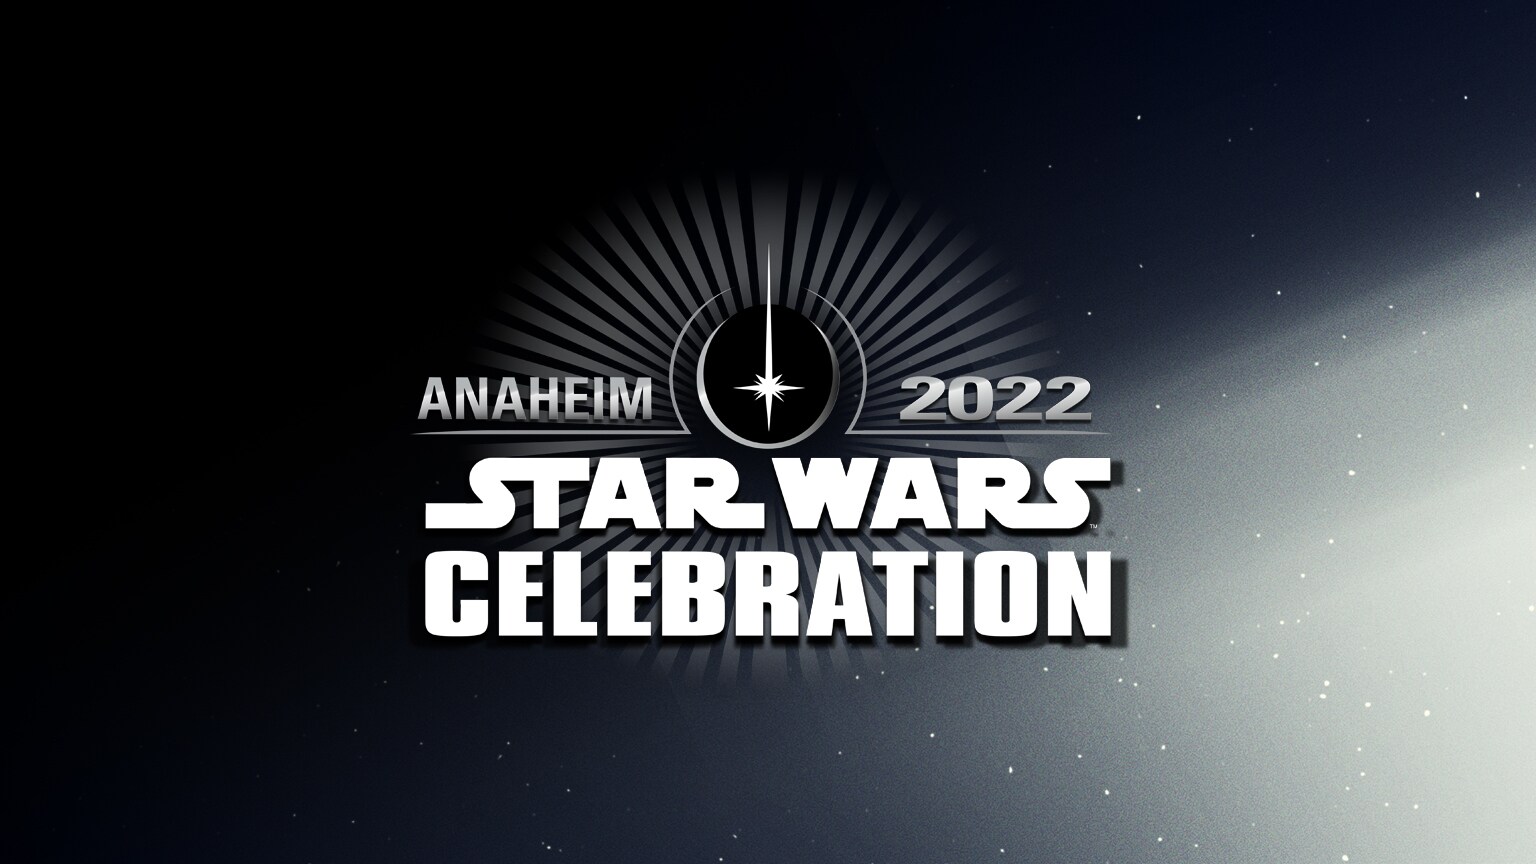 Check Out the Star Wars Celebration Anaheim 2022 Panel Schedule